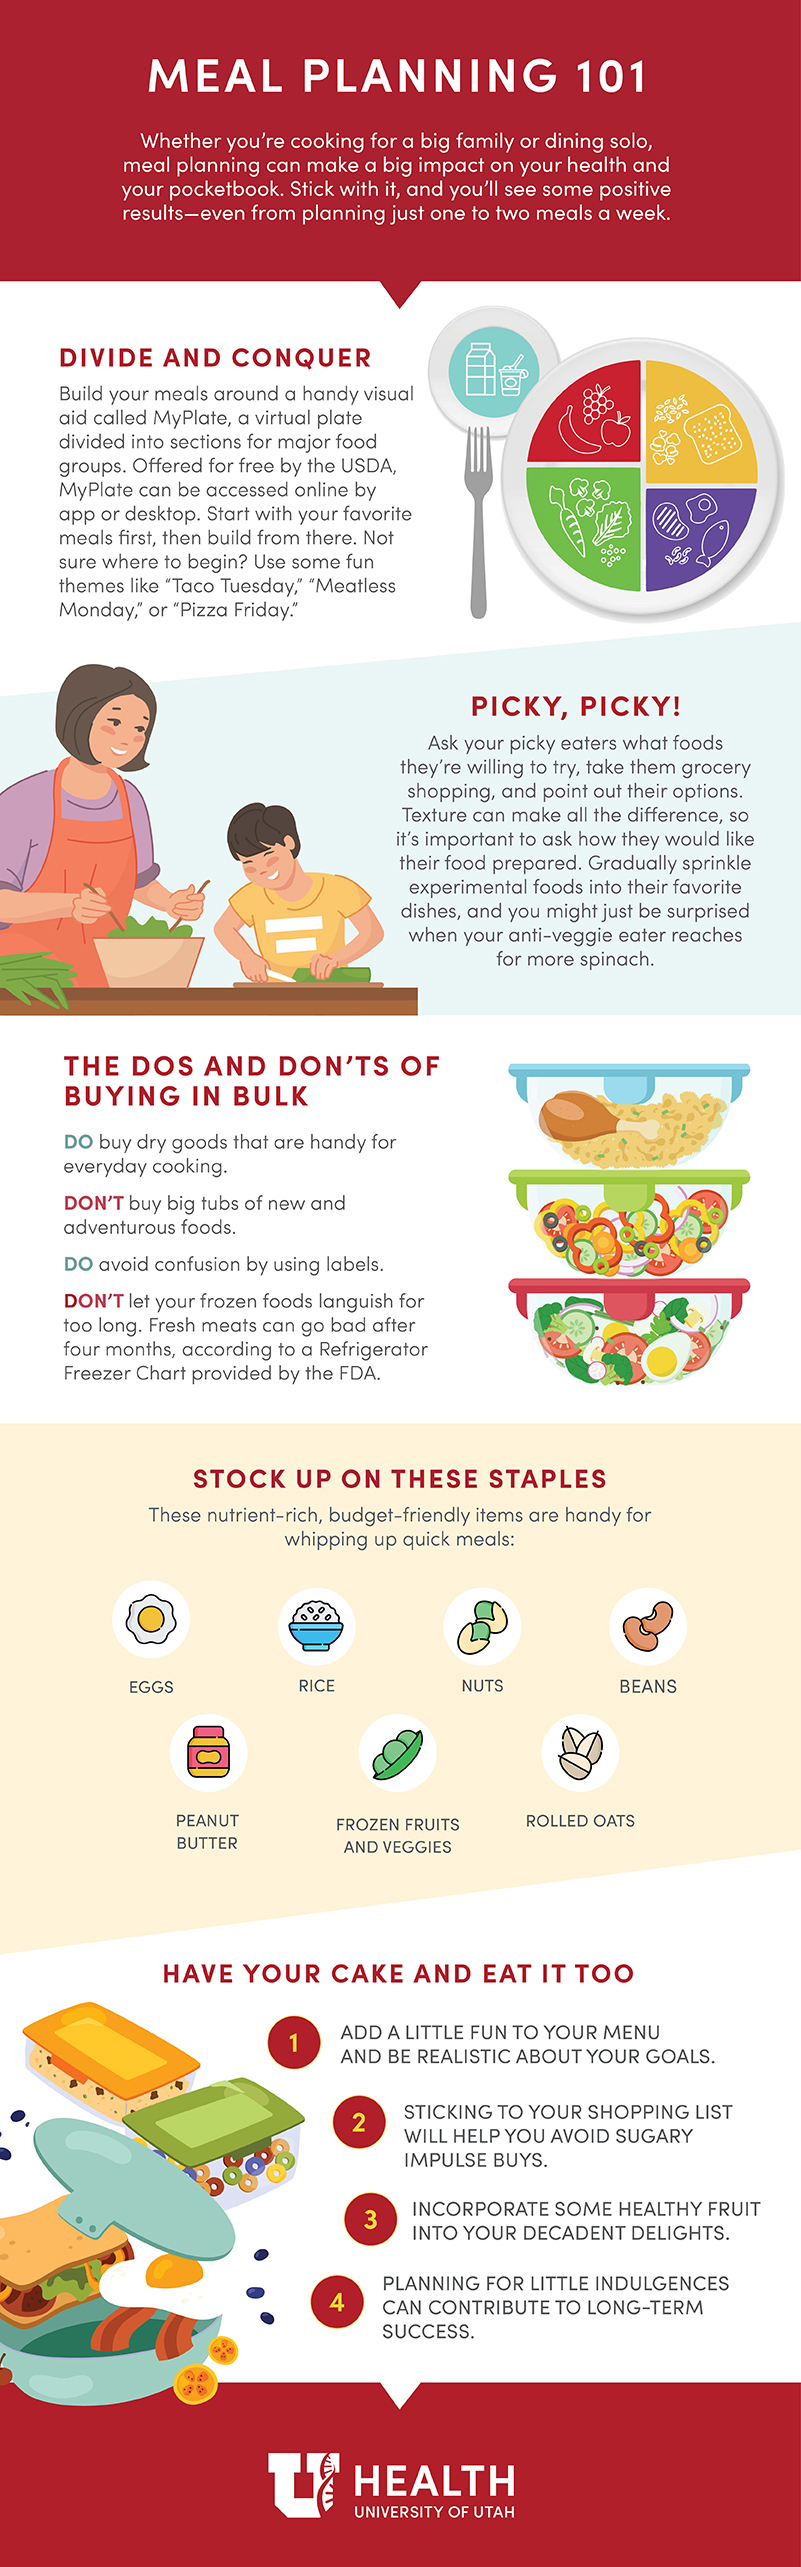 Infographic shows how to plans health meals for your family.